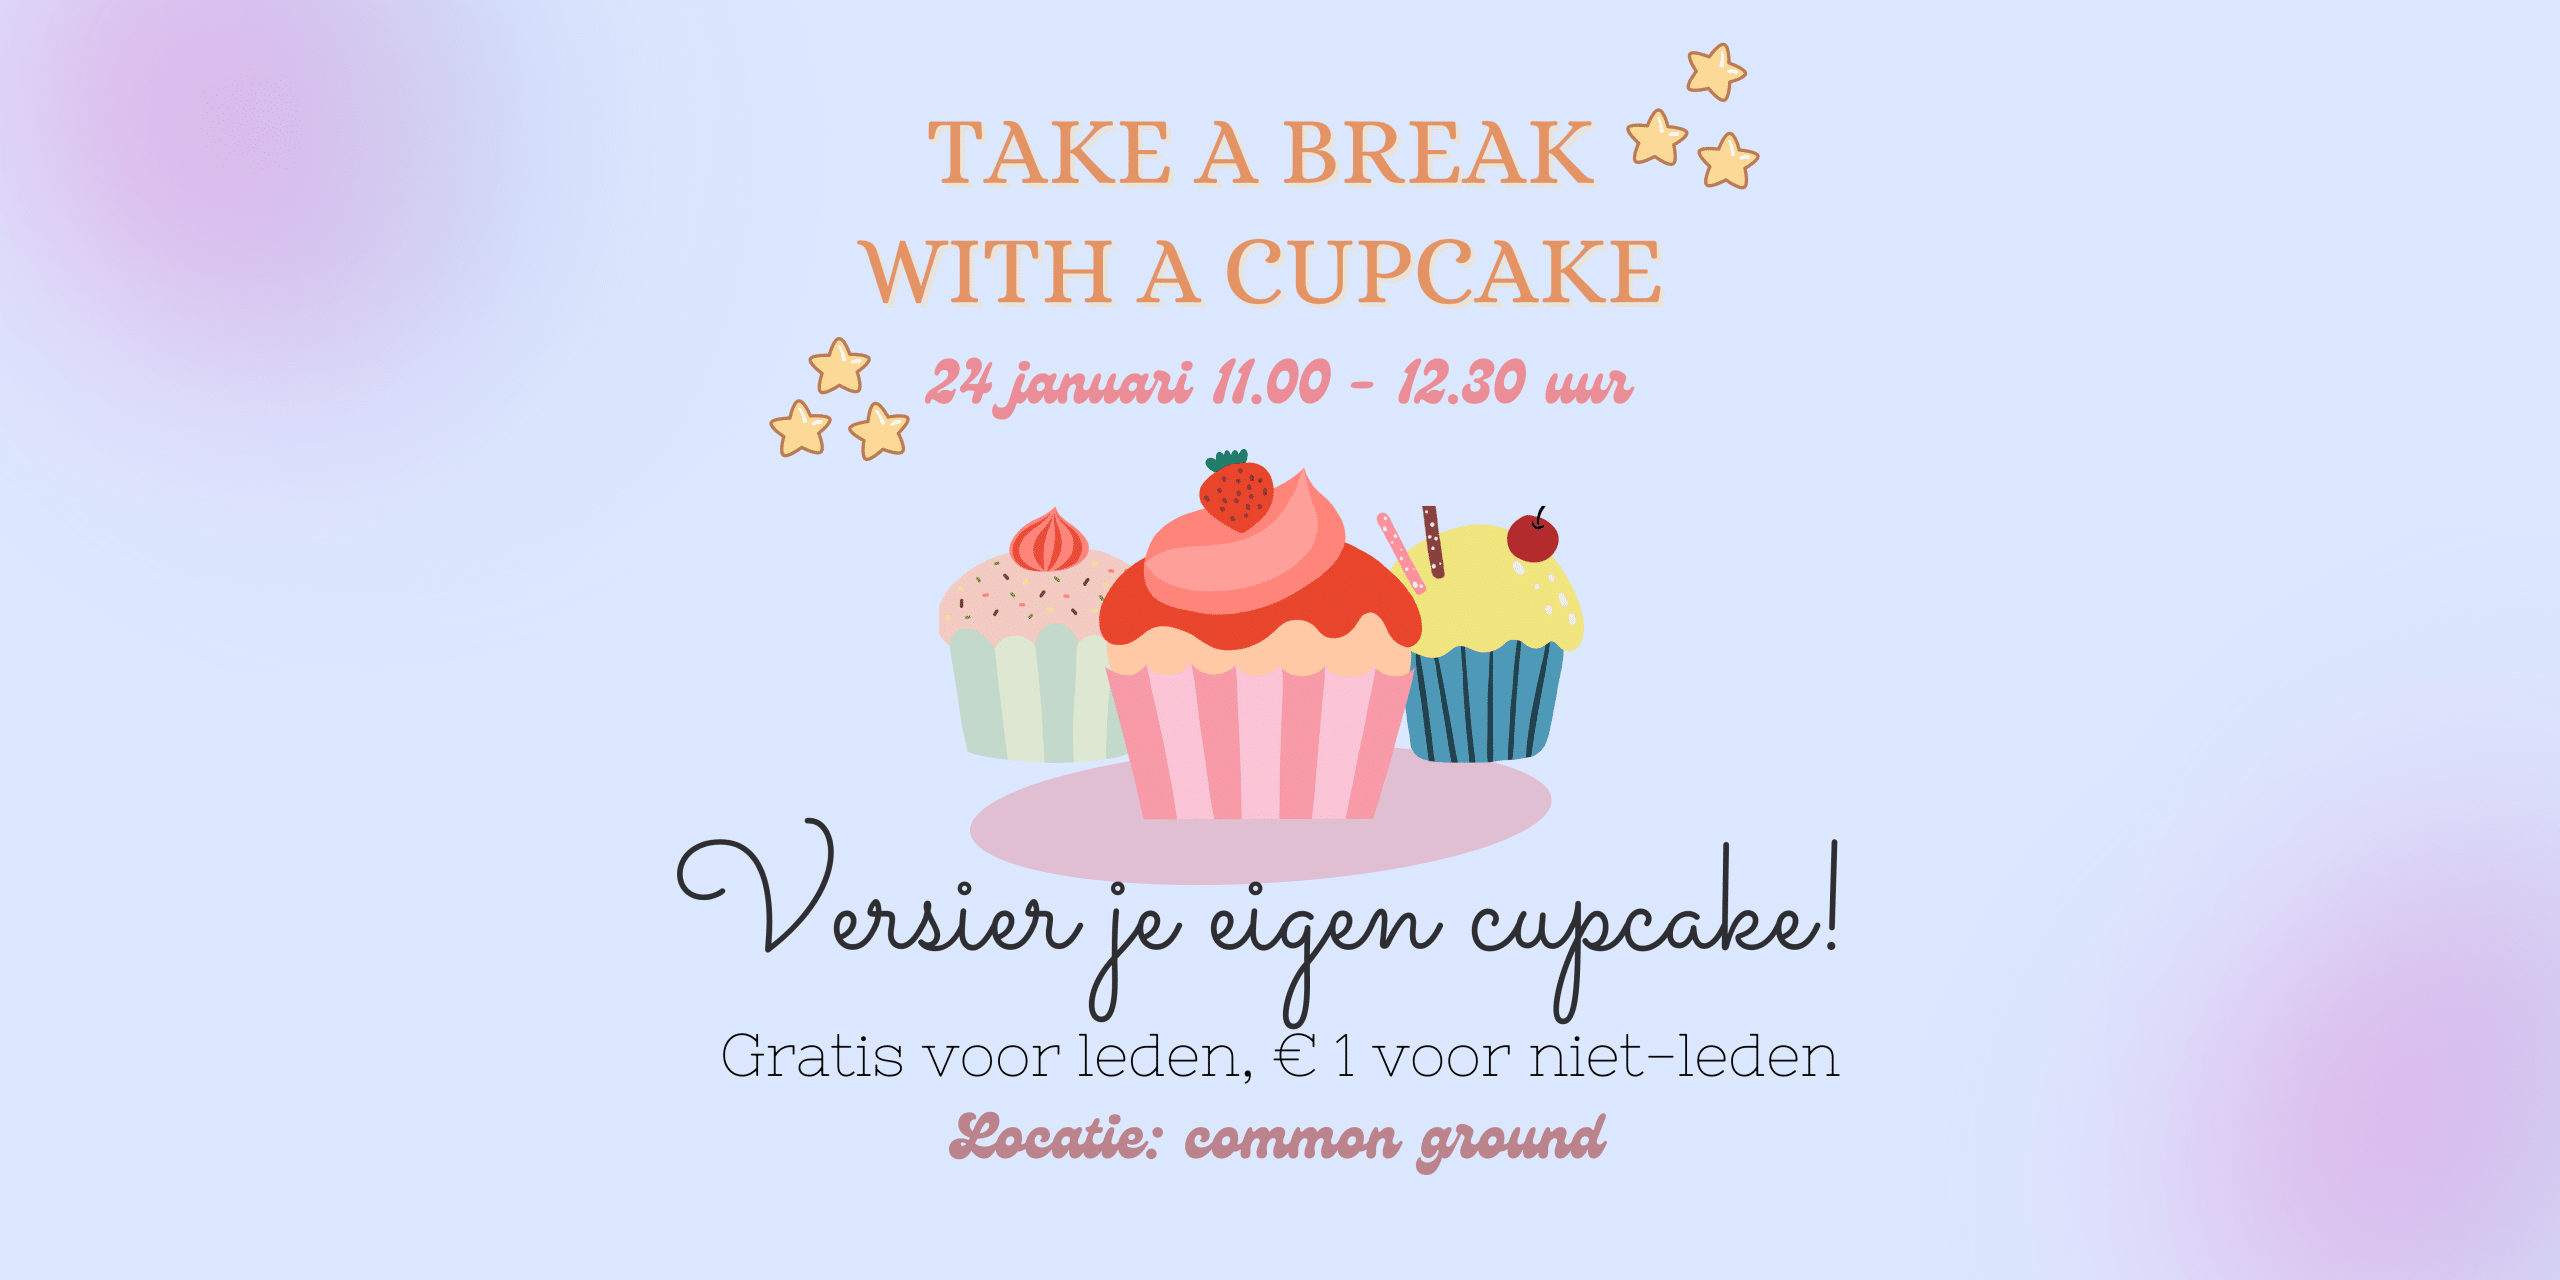 SAB-activiteit: take a break with a cupcake